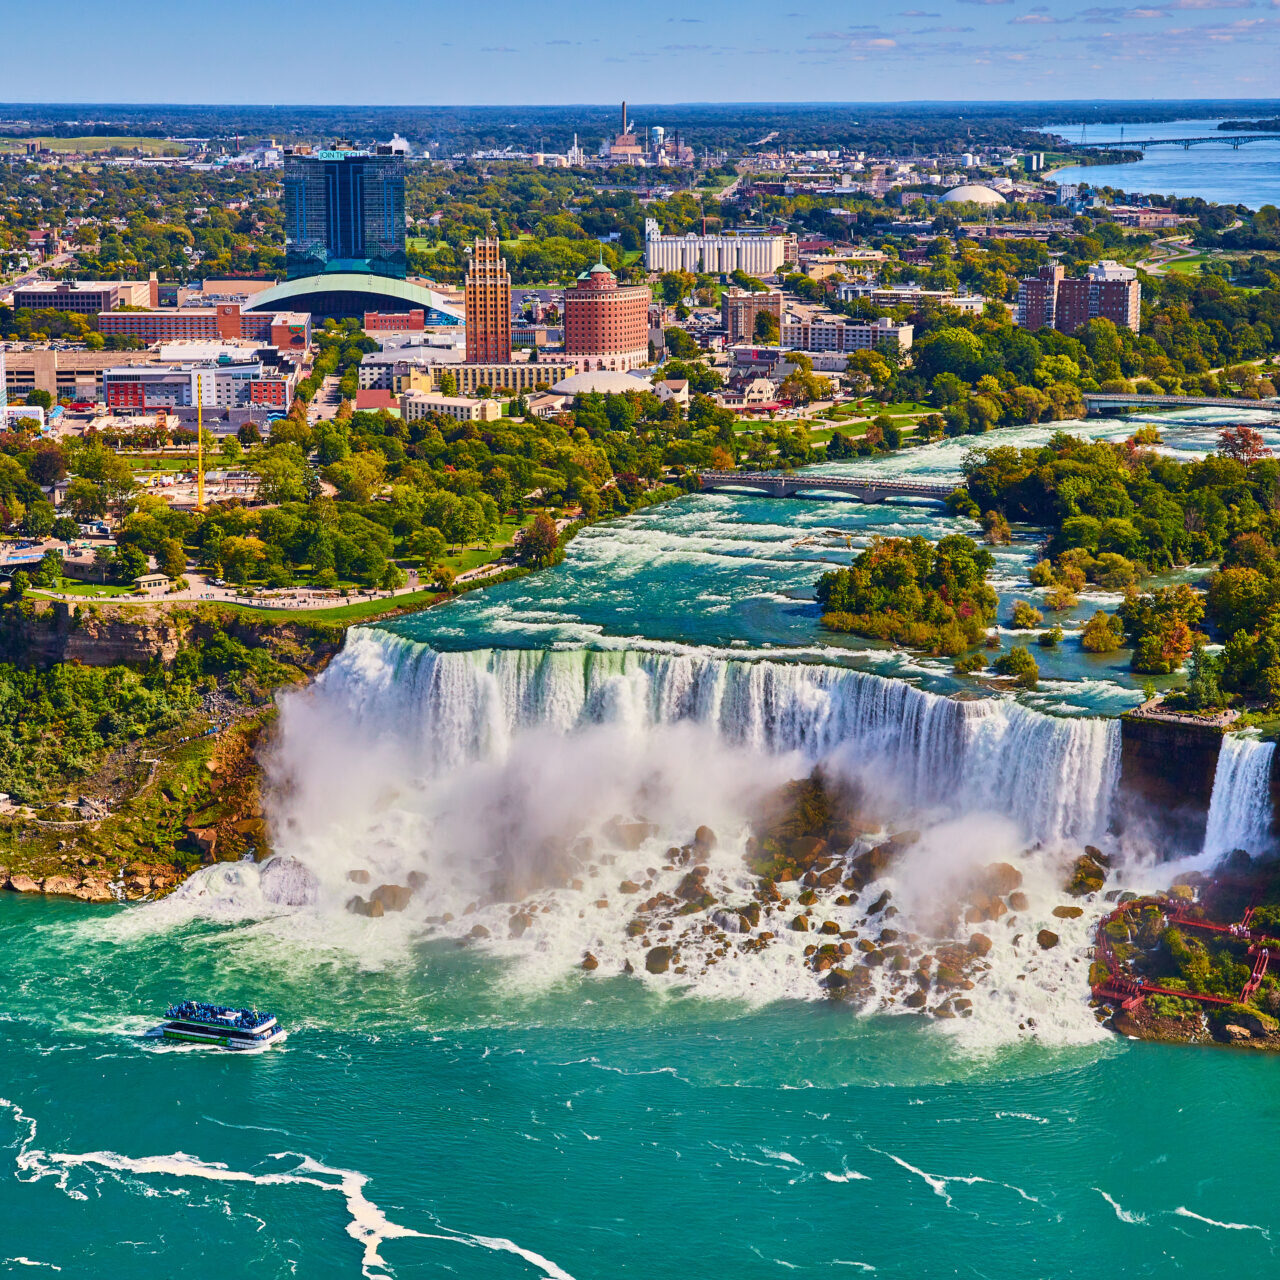 A view of the niagara falls from above.